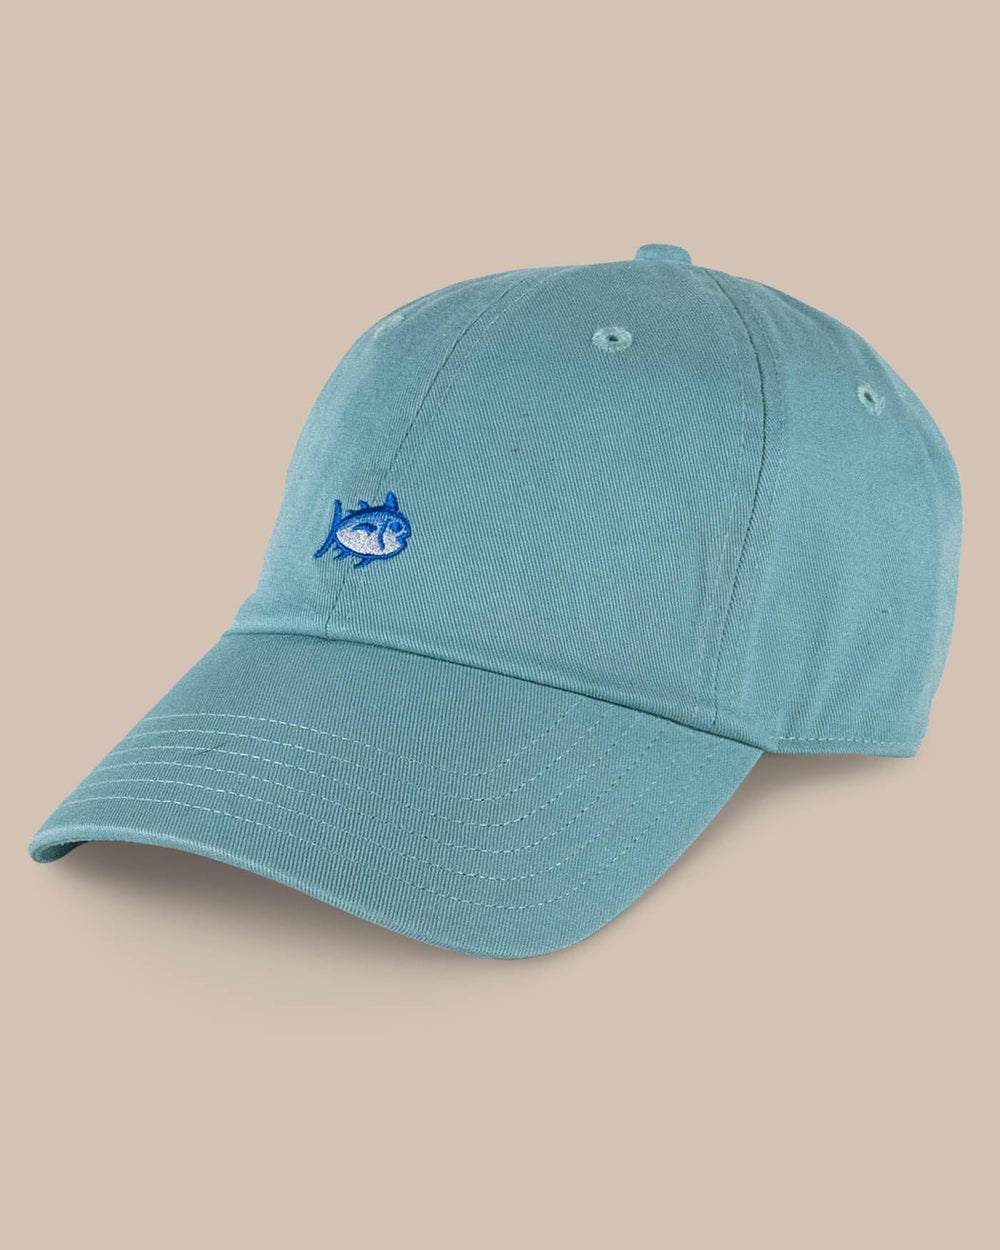 The front view of the Southern Tide Mini Skipjack Leather Strap Hat by Southern Tide - Light Green